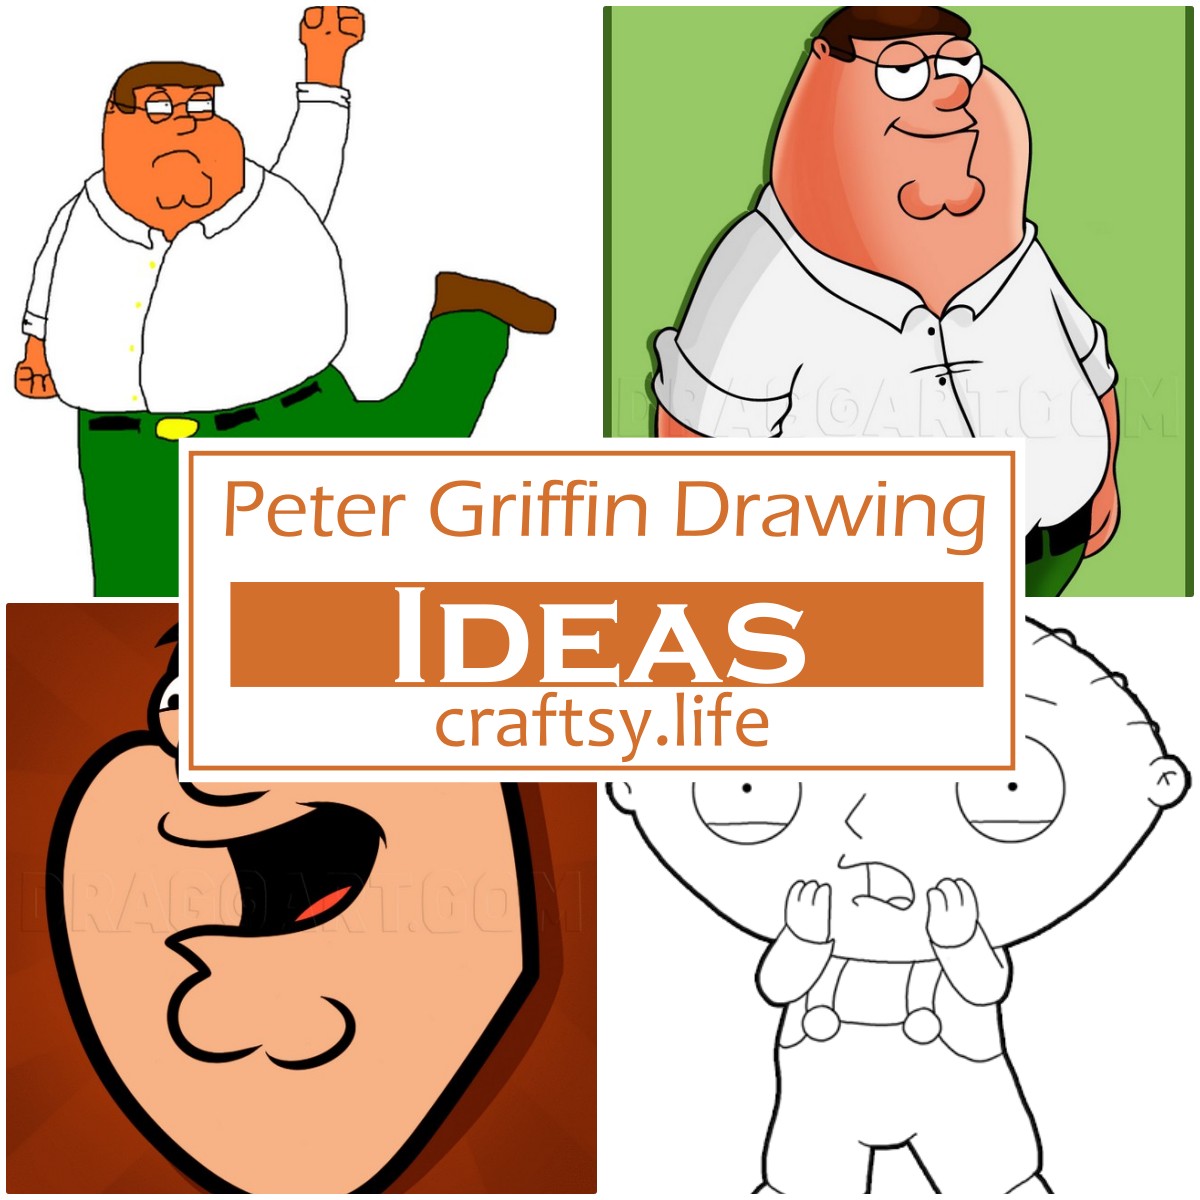 Peter Griffin Drawing Ideas 1